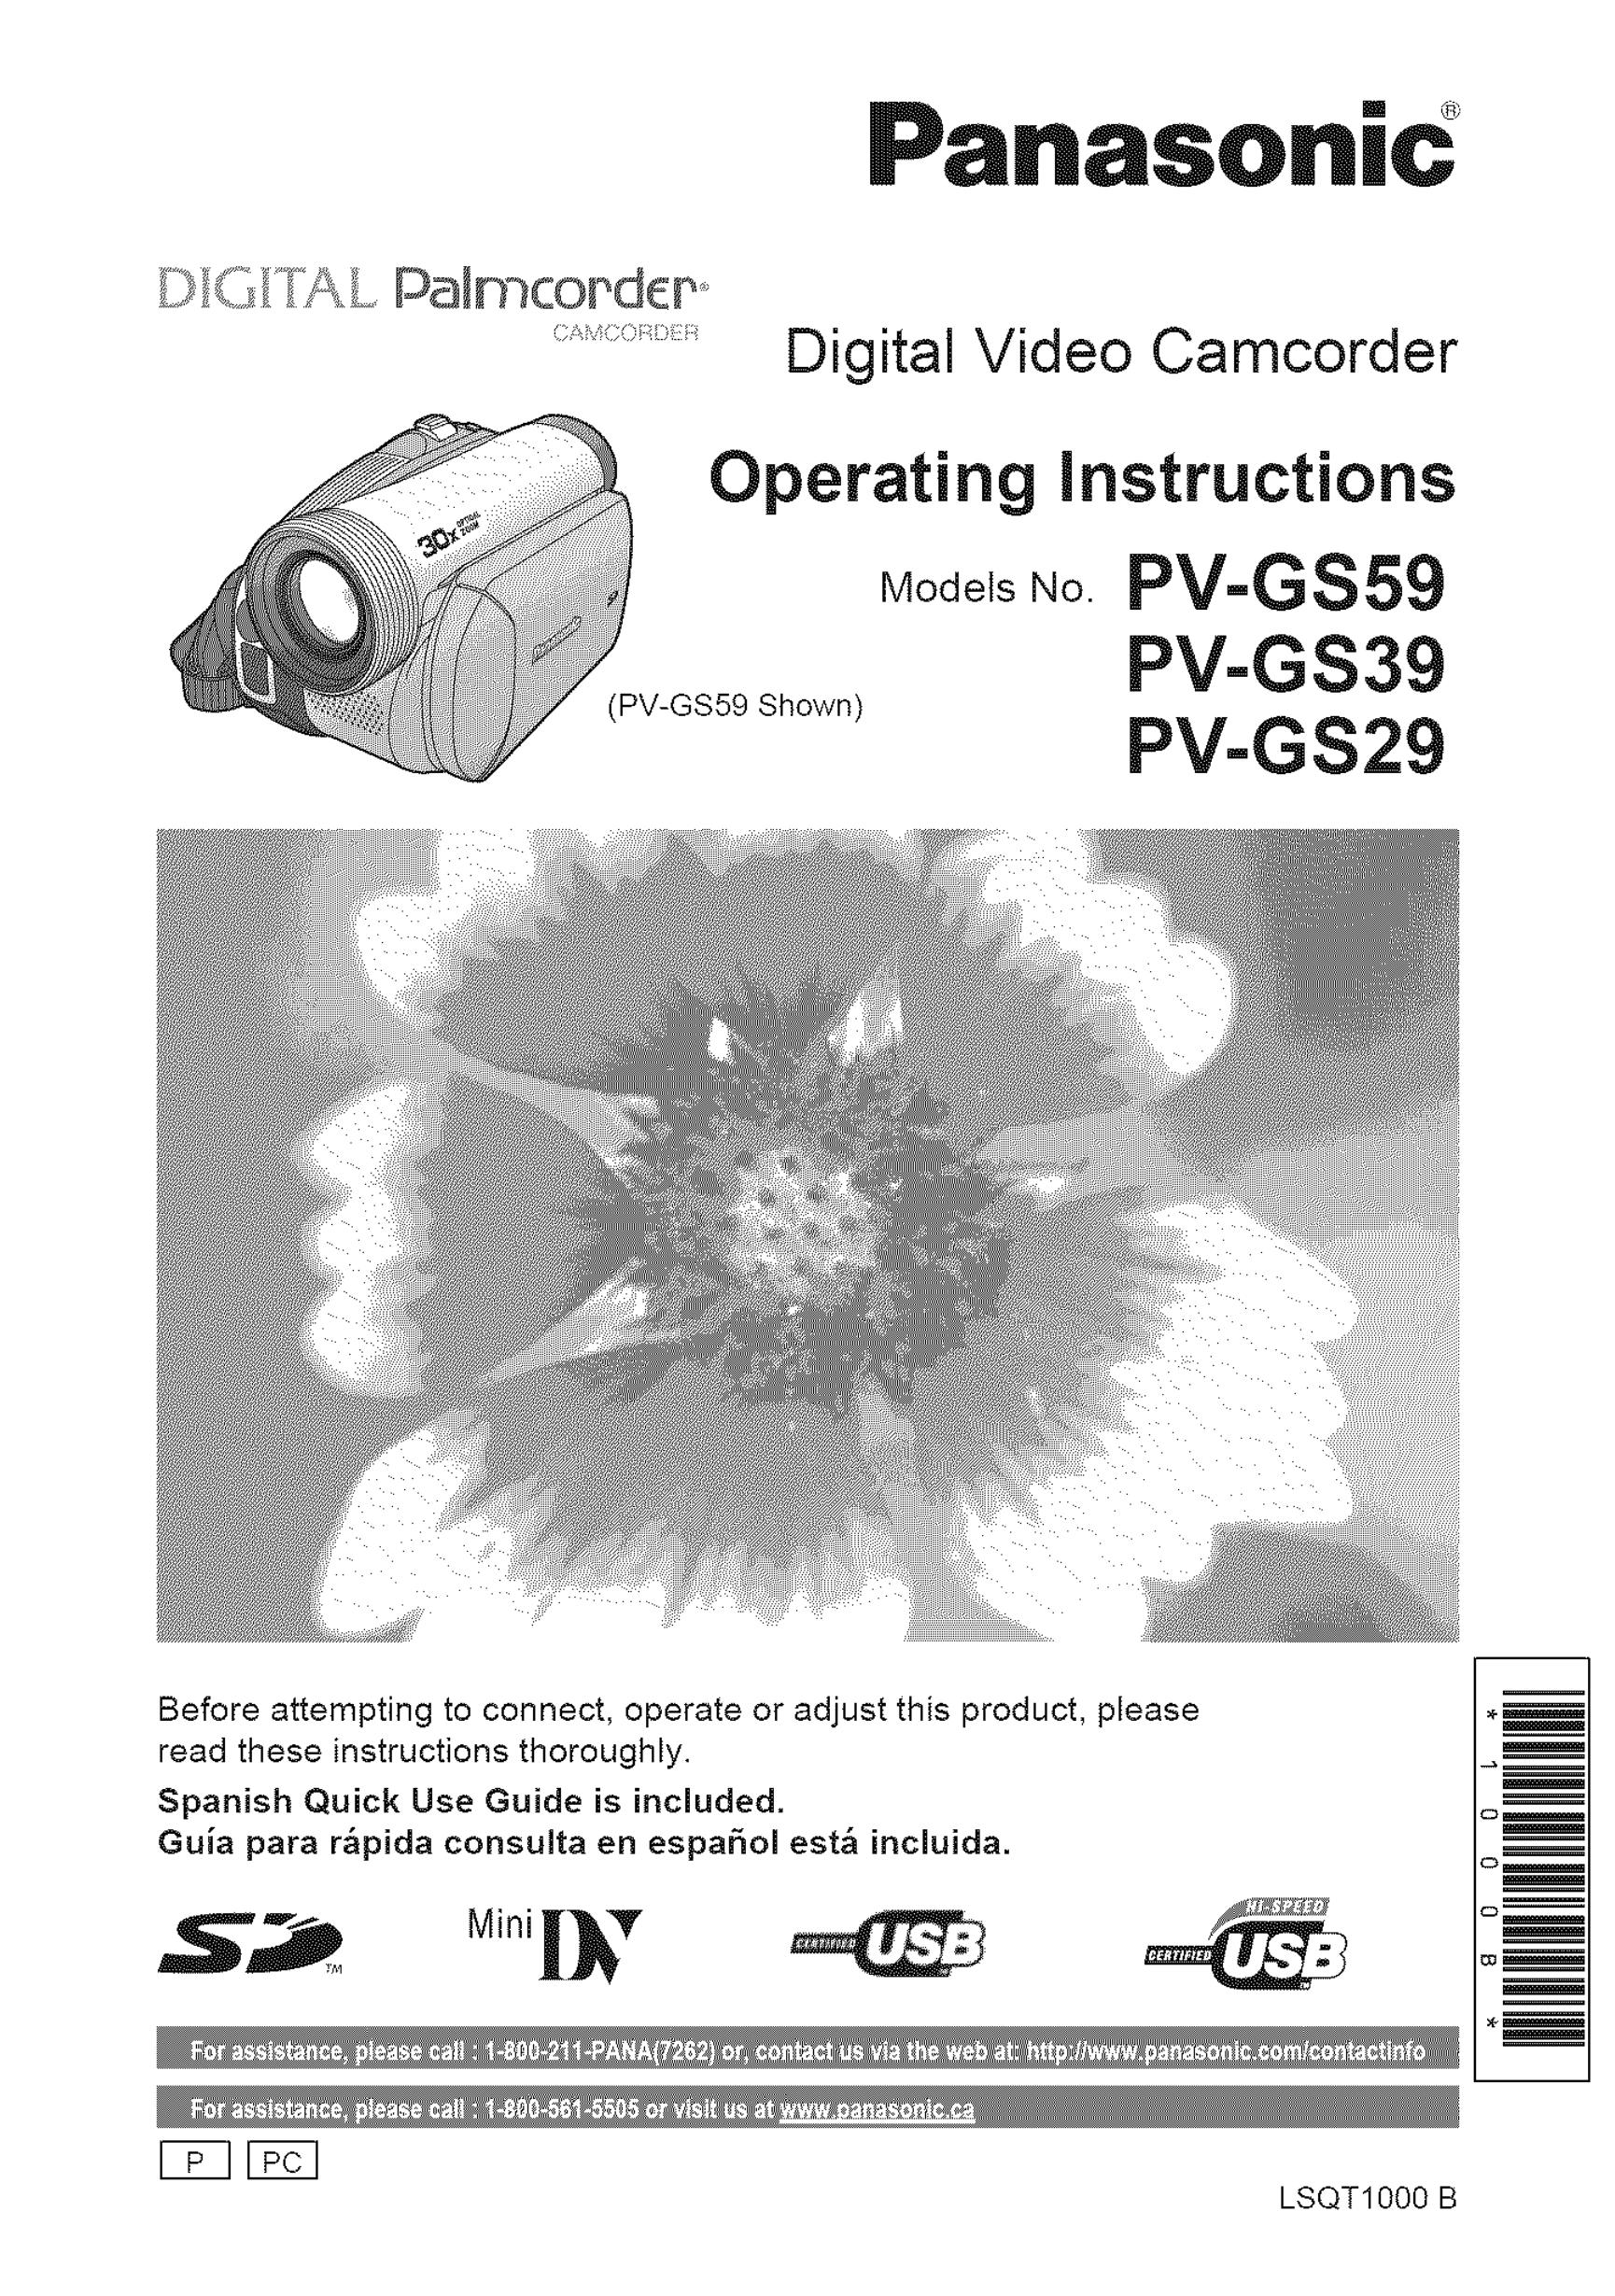 Panasonic PV-GS29 Camcorder Accessories User Manual